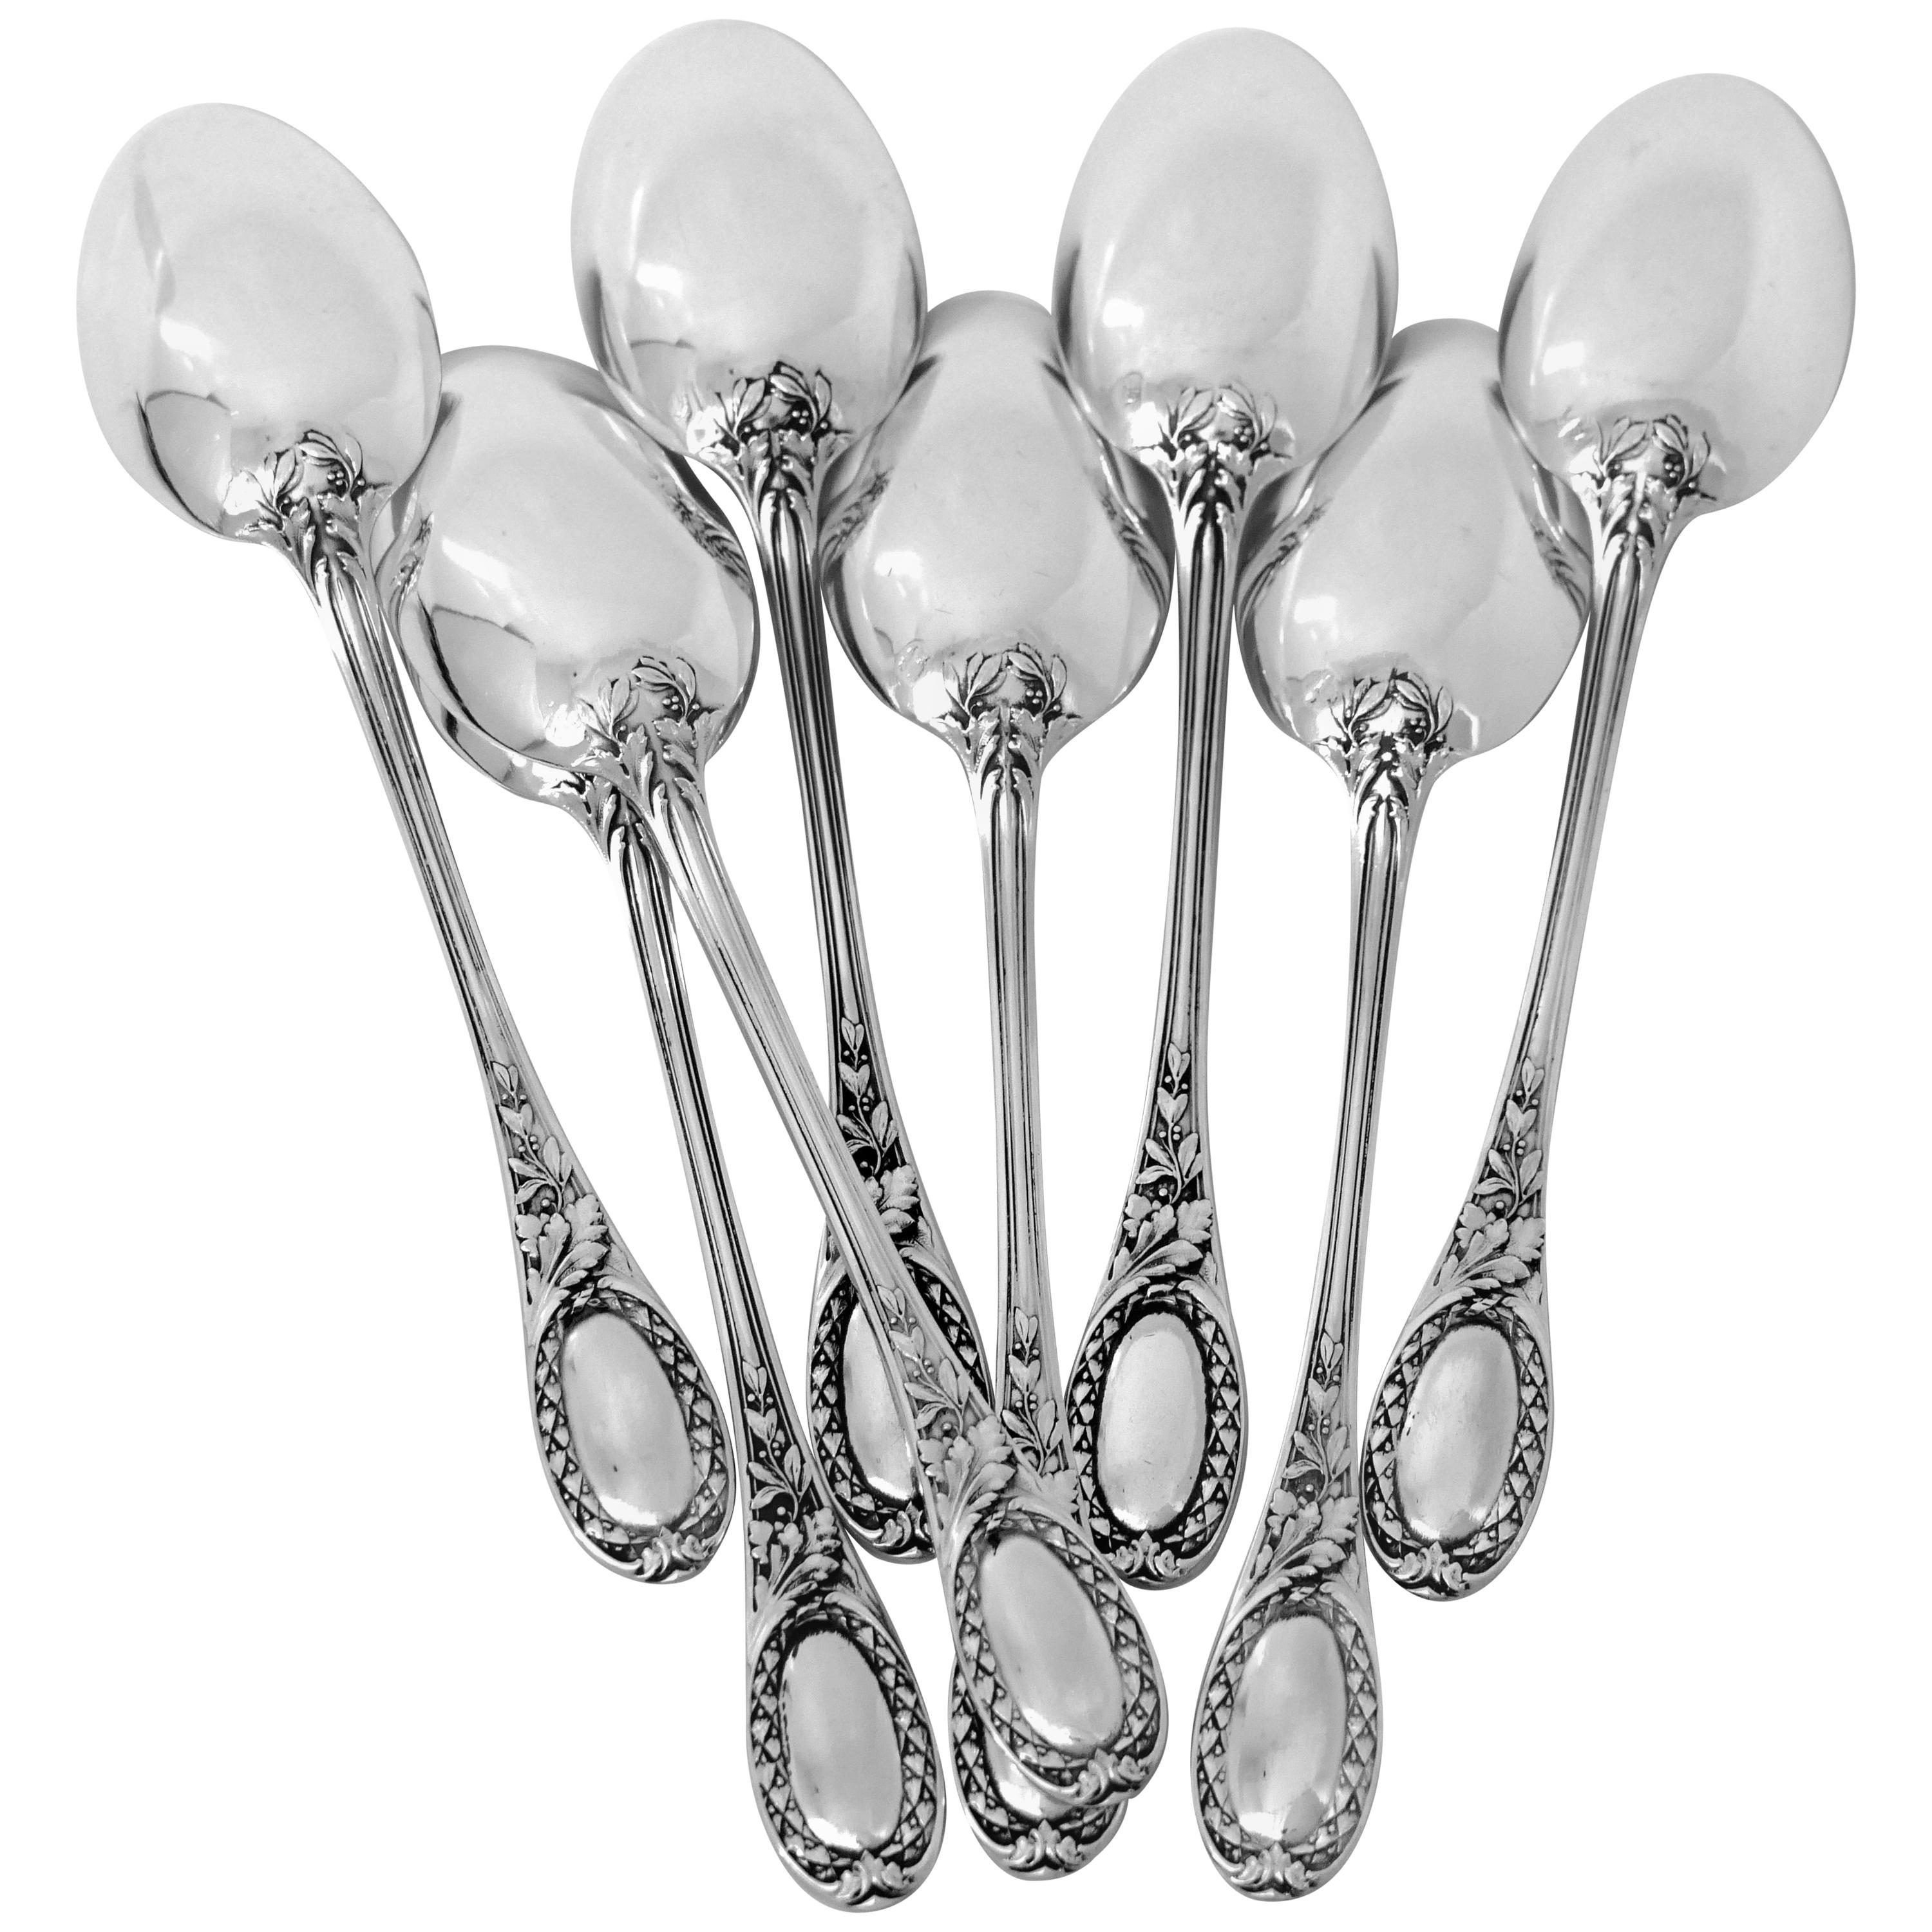 Puiforcat French Sterling Silver Coffee Dessert Spoons Set, Neoclassical For Sale